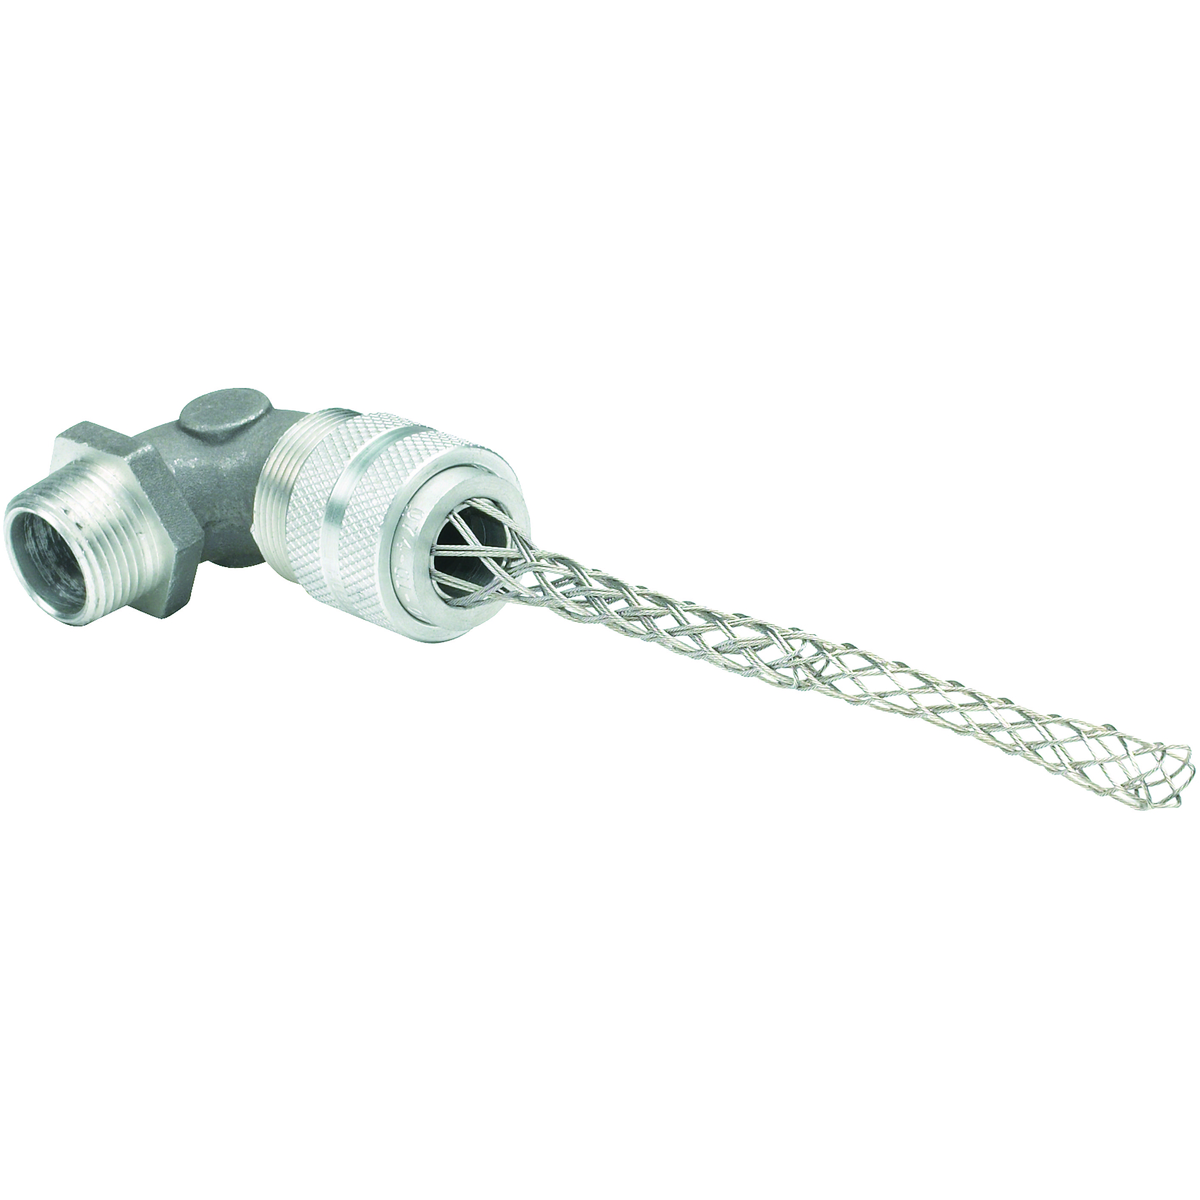 Z SERIES FITTINGS - ALUMINUM CORD CONNECTOR WITH MESH GRIP - Z CORDCONNECTOR - 90 DEGREES - NPT SIZE 1/2 IN - BROWN